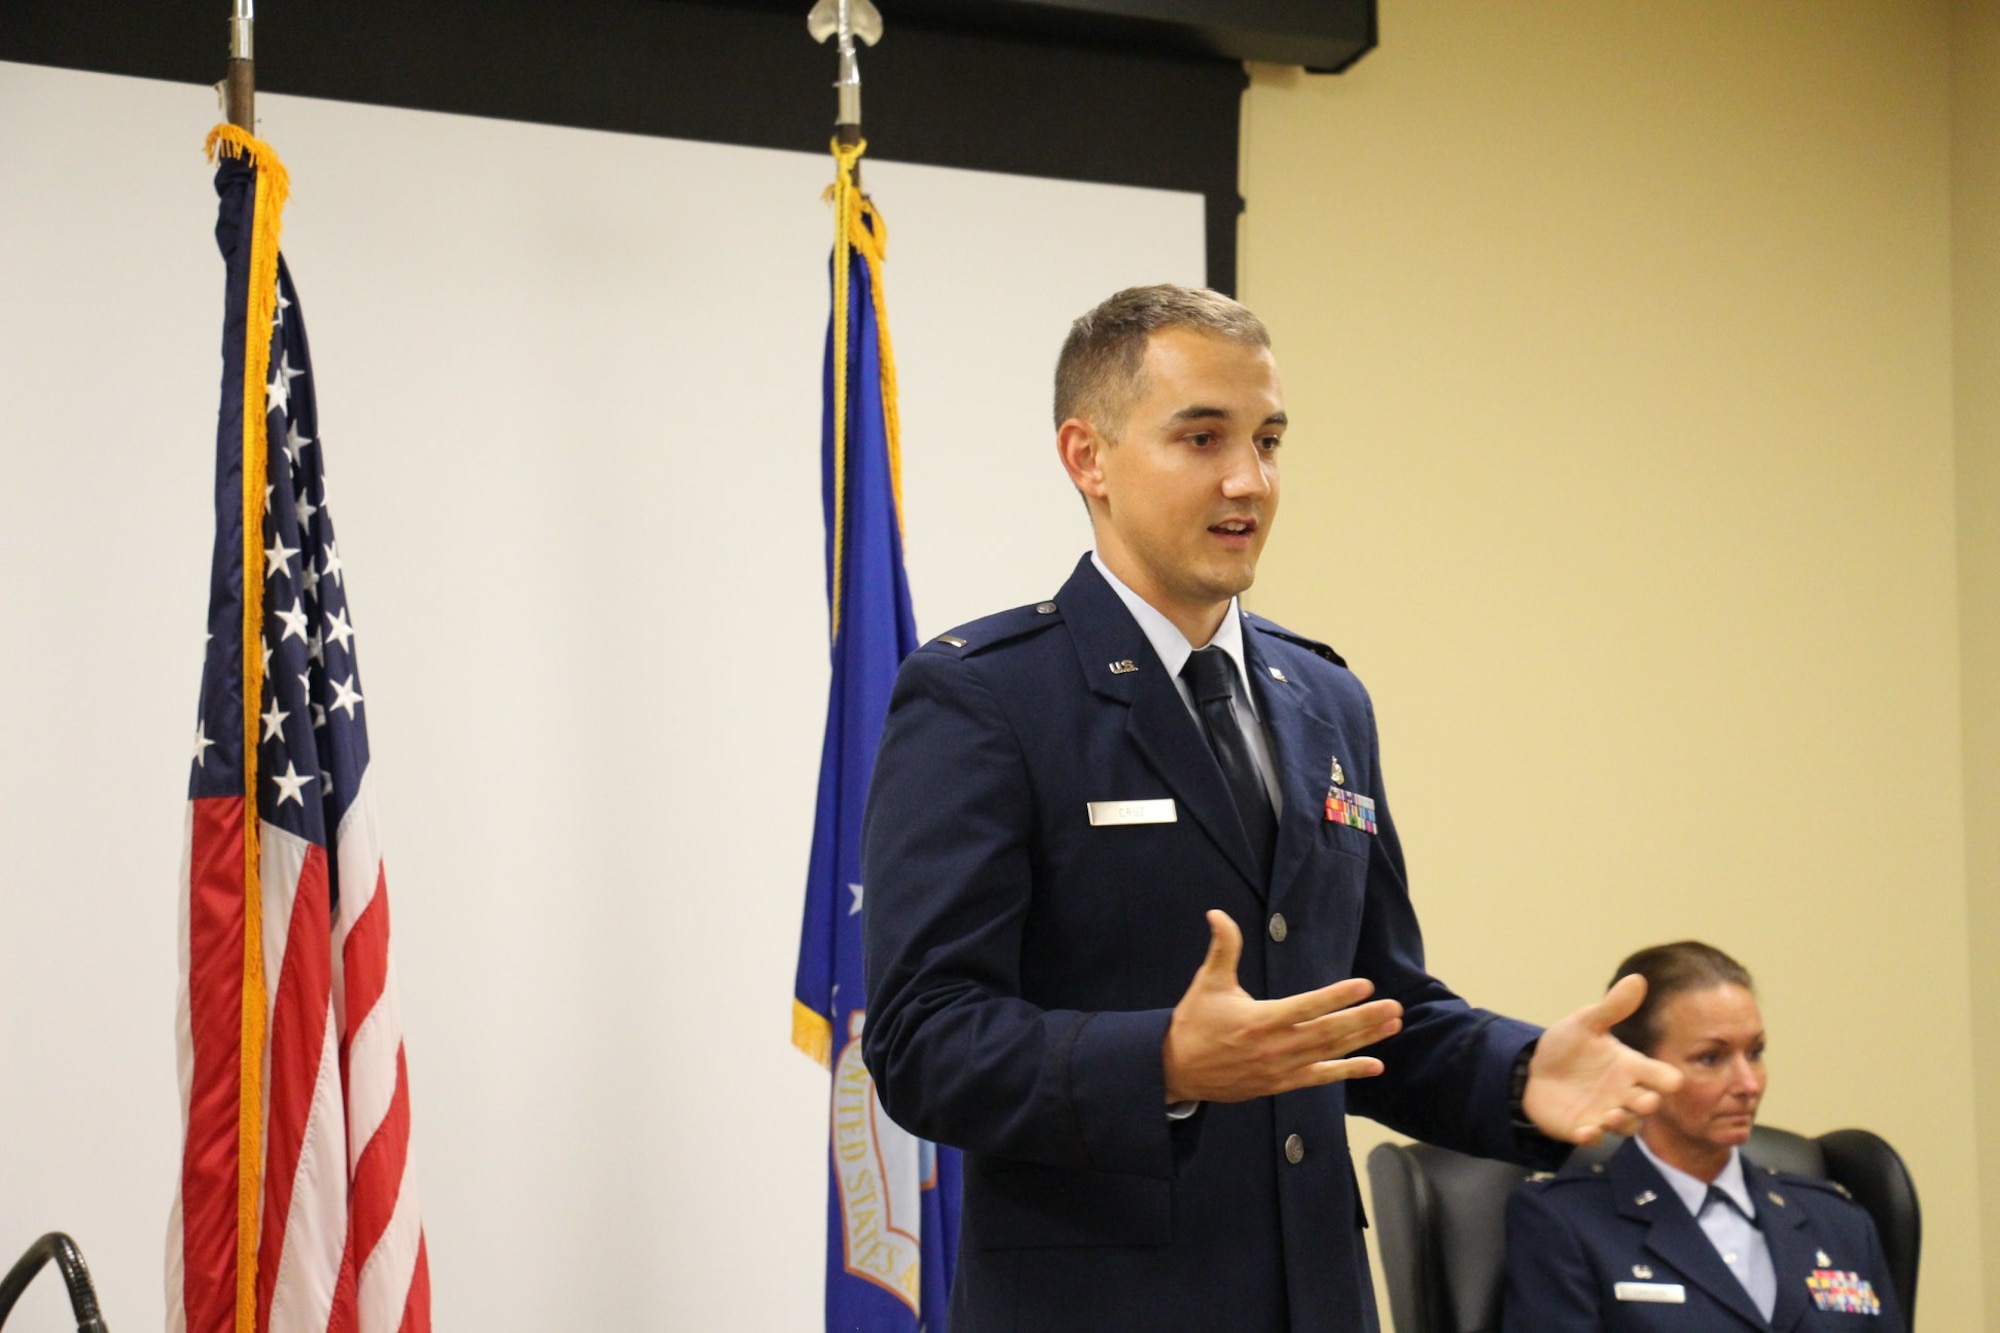 U.S. Air Force 1st Lt. Brandon Cruz, 6th Medical Operations Squadron medical service corps officer, speaks during his commissioning ceremony at MacDill Air Force Base, Fla., June 12, 2018.